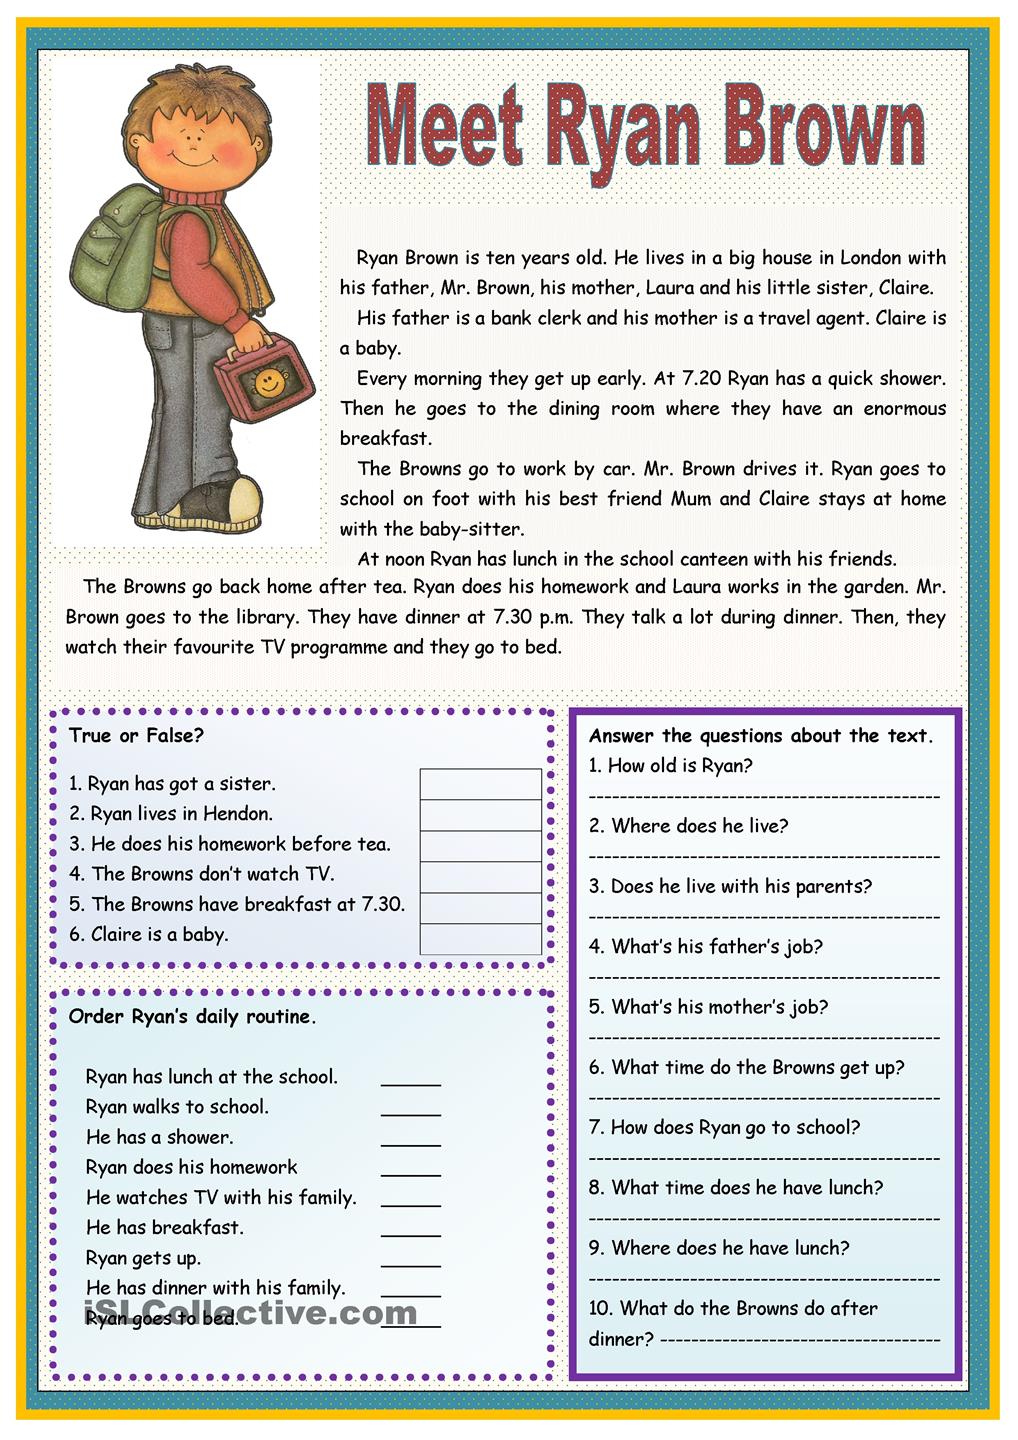 43-easy-reading-comprehension-worksheets-for-adults-most-complete